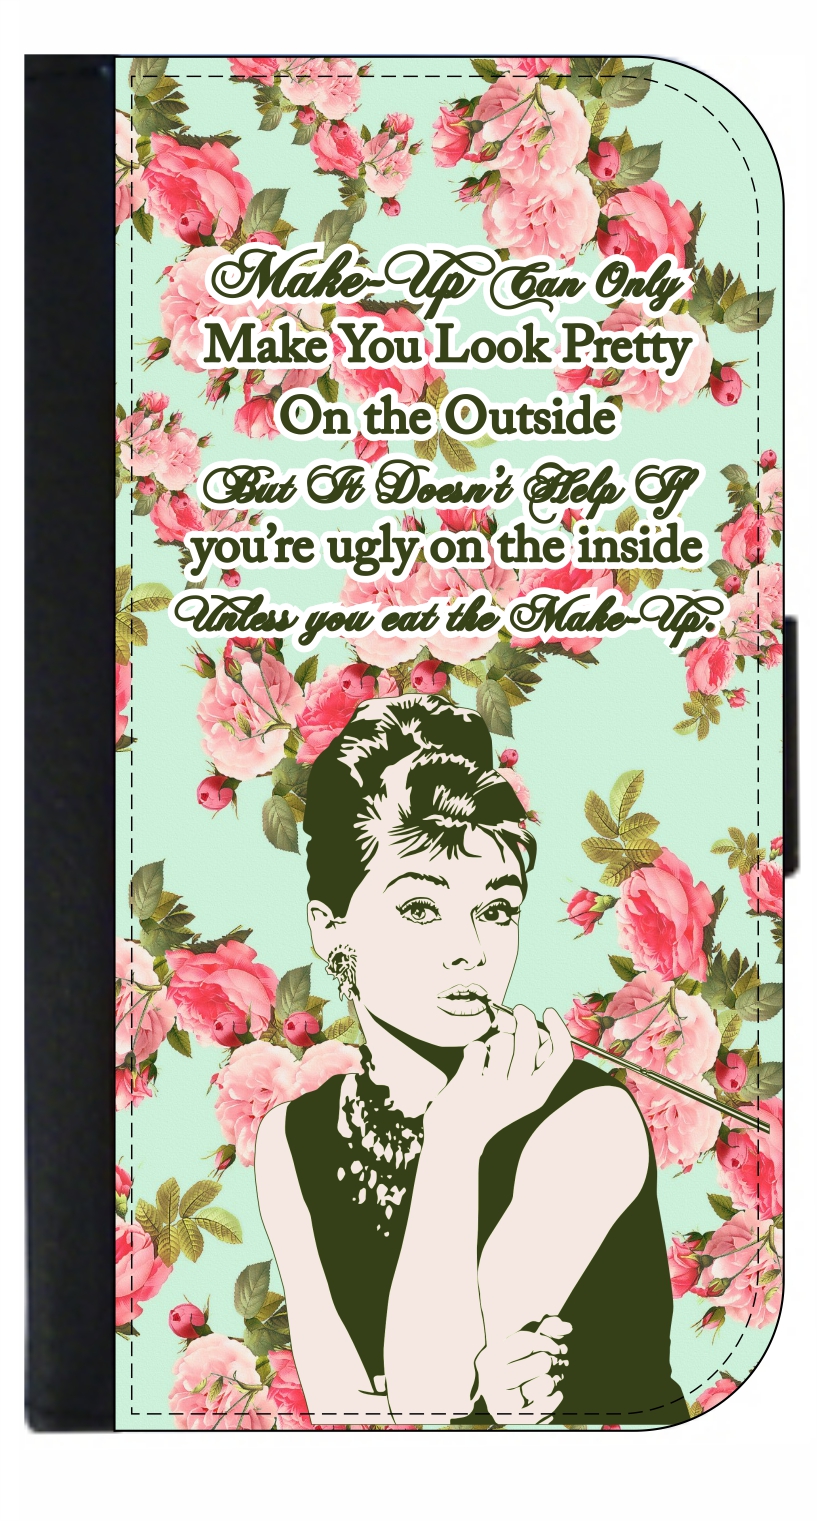 Audrey Hepburn Makeup Quote on Vintage Style Floral Pattern - Galaxy s10 Case Black - Galaxy s10 Case Leather Impression - s10 Wallet Case - s10 Case Card Holder - image 1 of 3